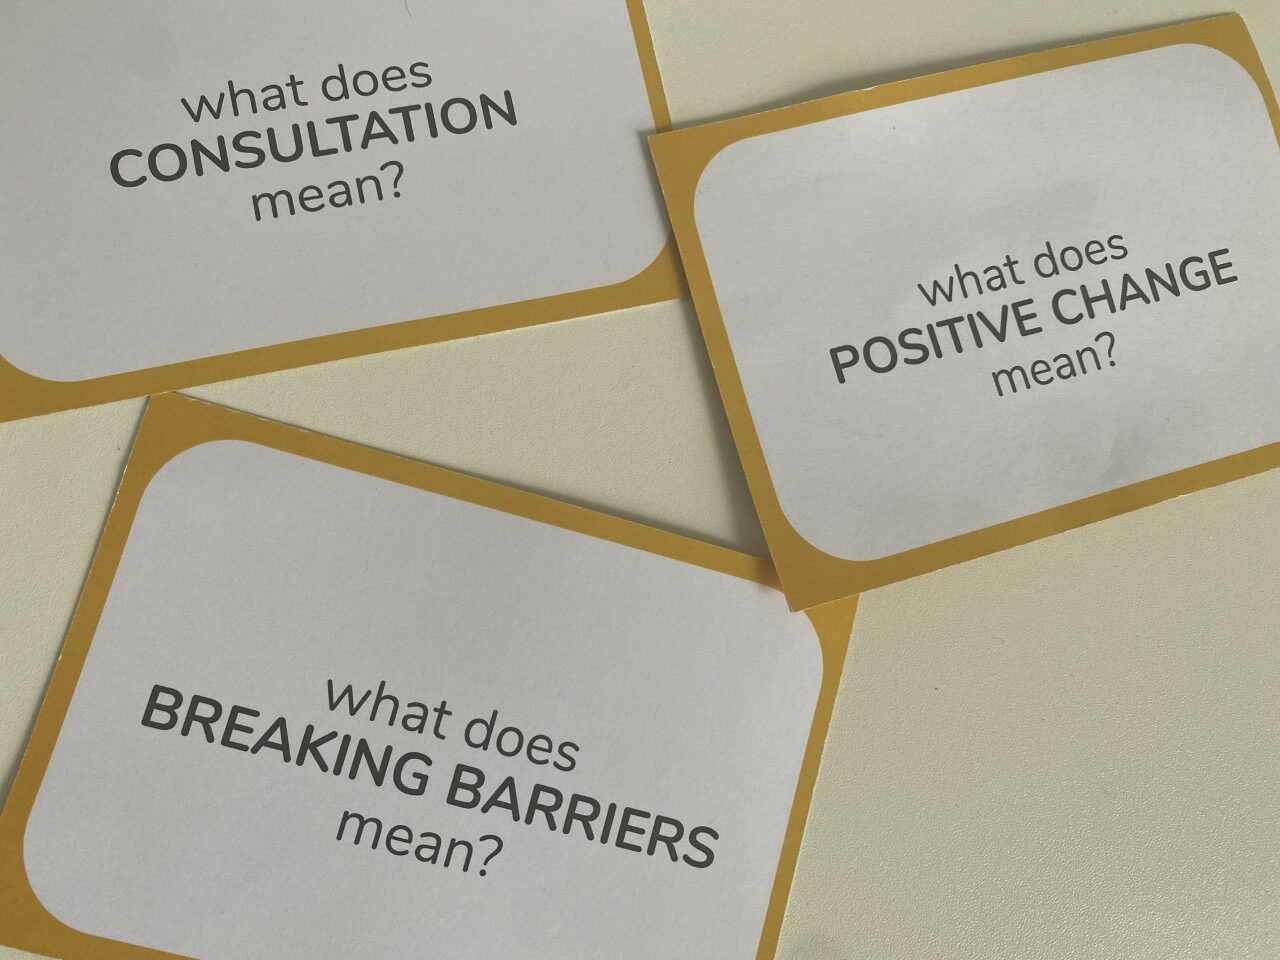 Image of postcards which were handed out at the event with words commonly used in consultation